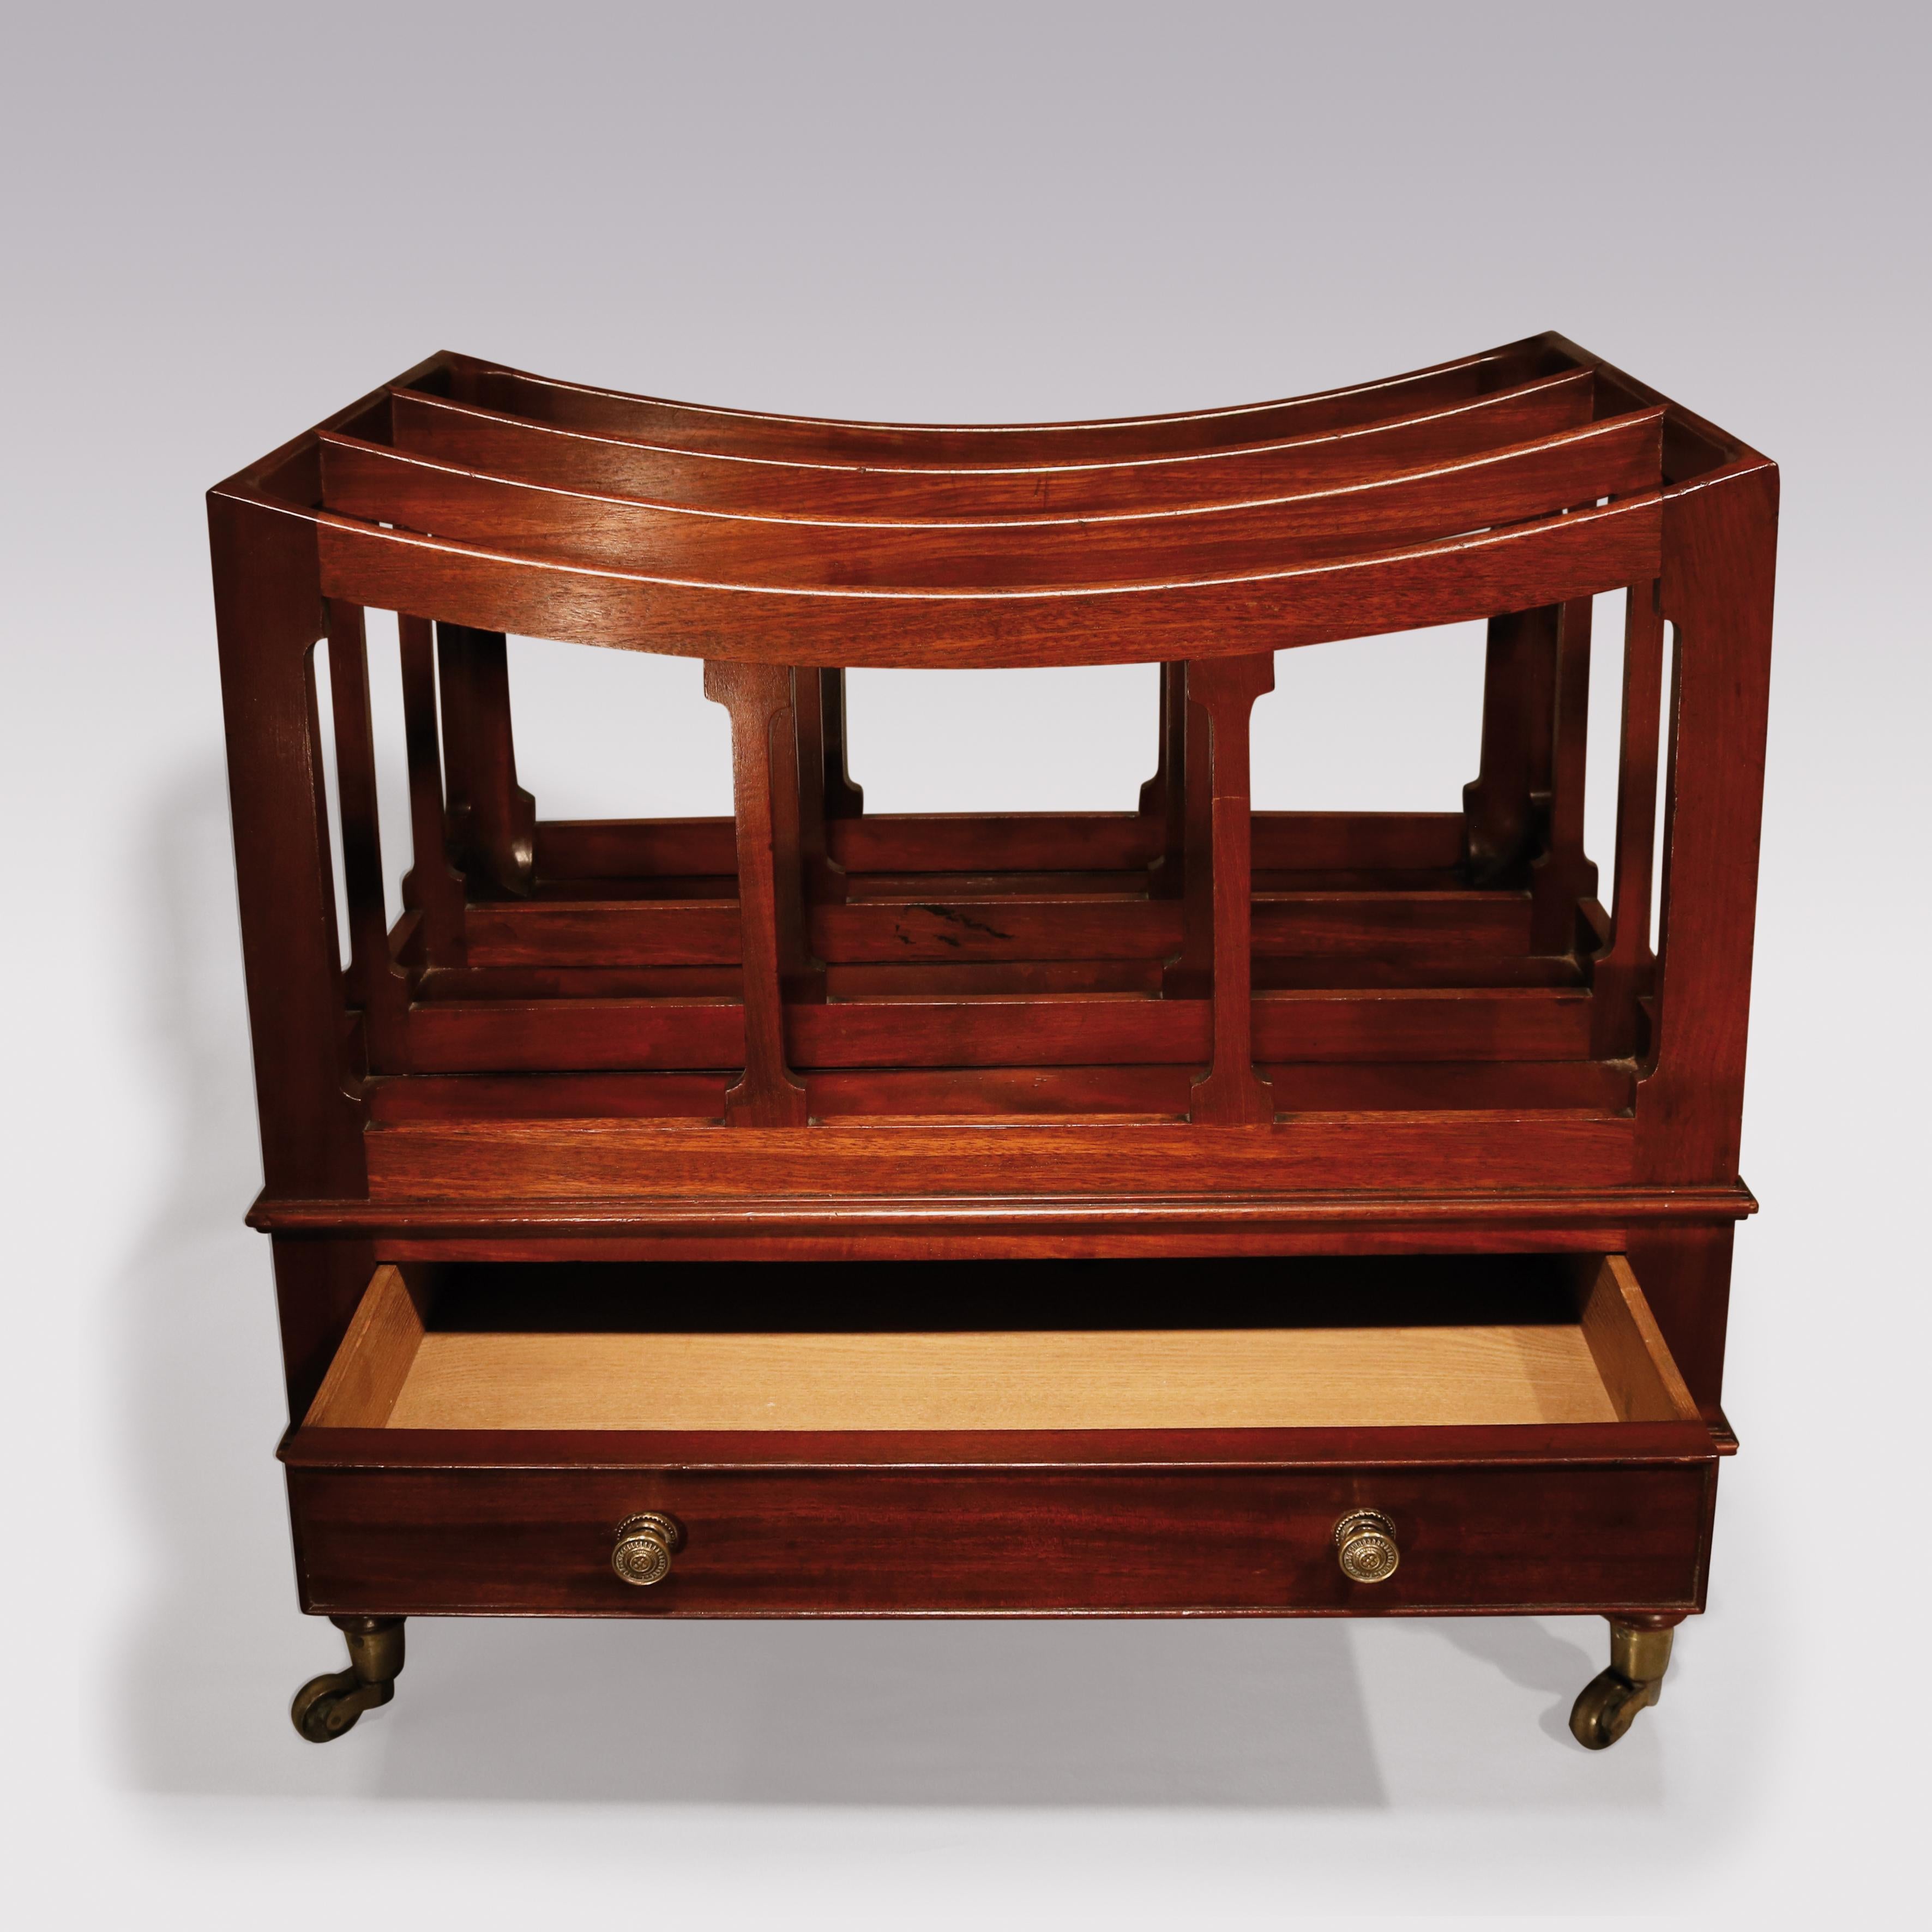 An early 19th century Regency period mahogany 3-section Canterbury, having curved sections with silhouette column supports, fitted with frieze drawer, supported on baluster turned legs, ending on original brass castors.